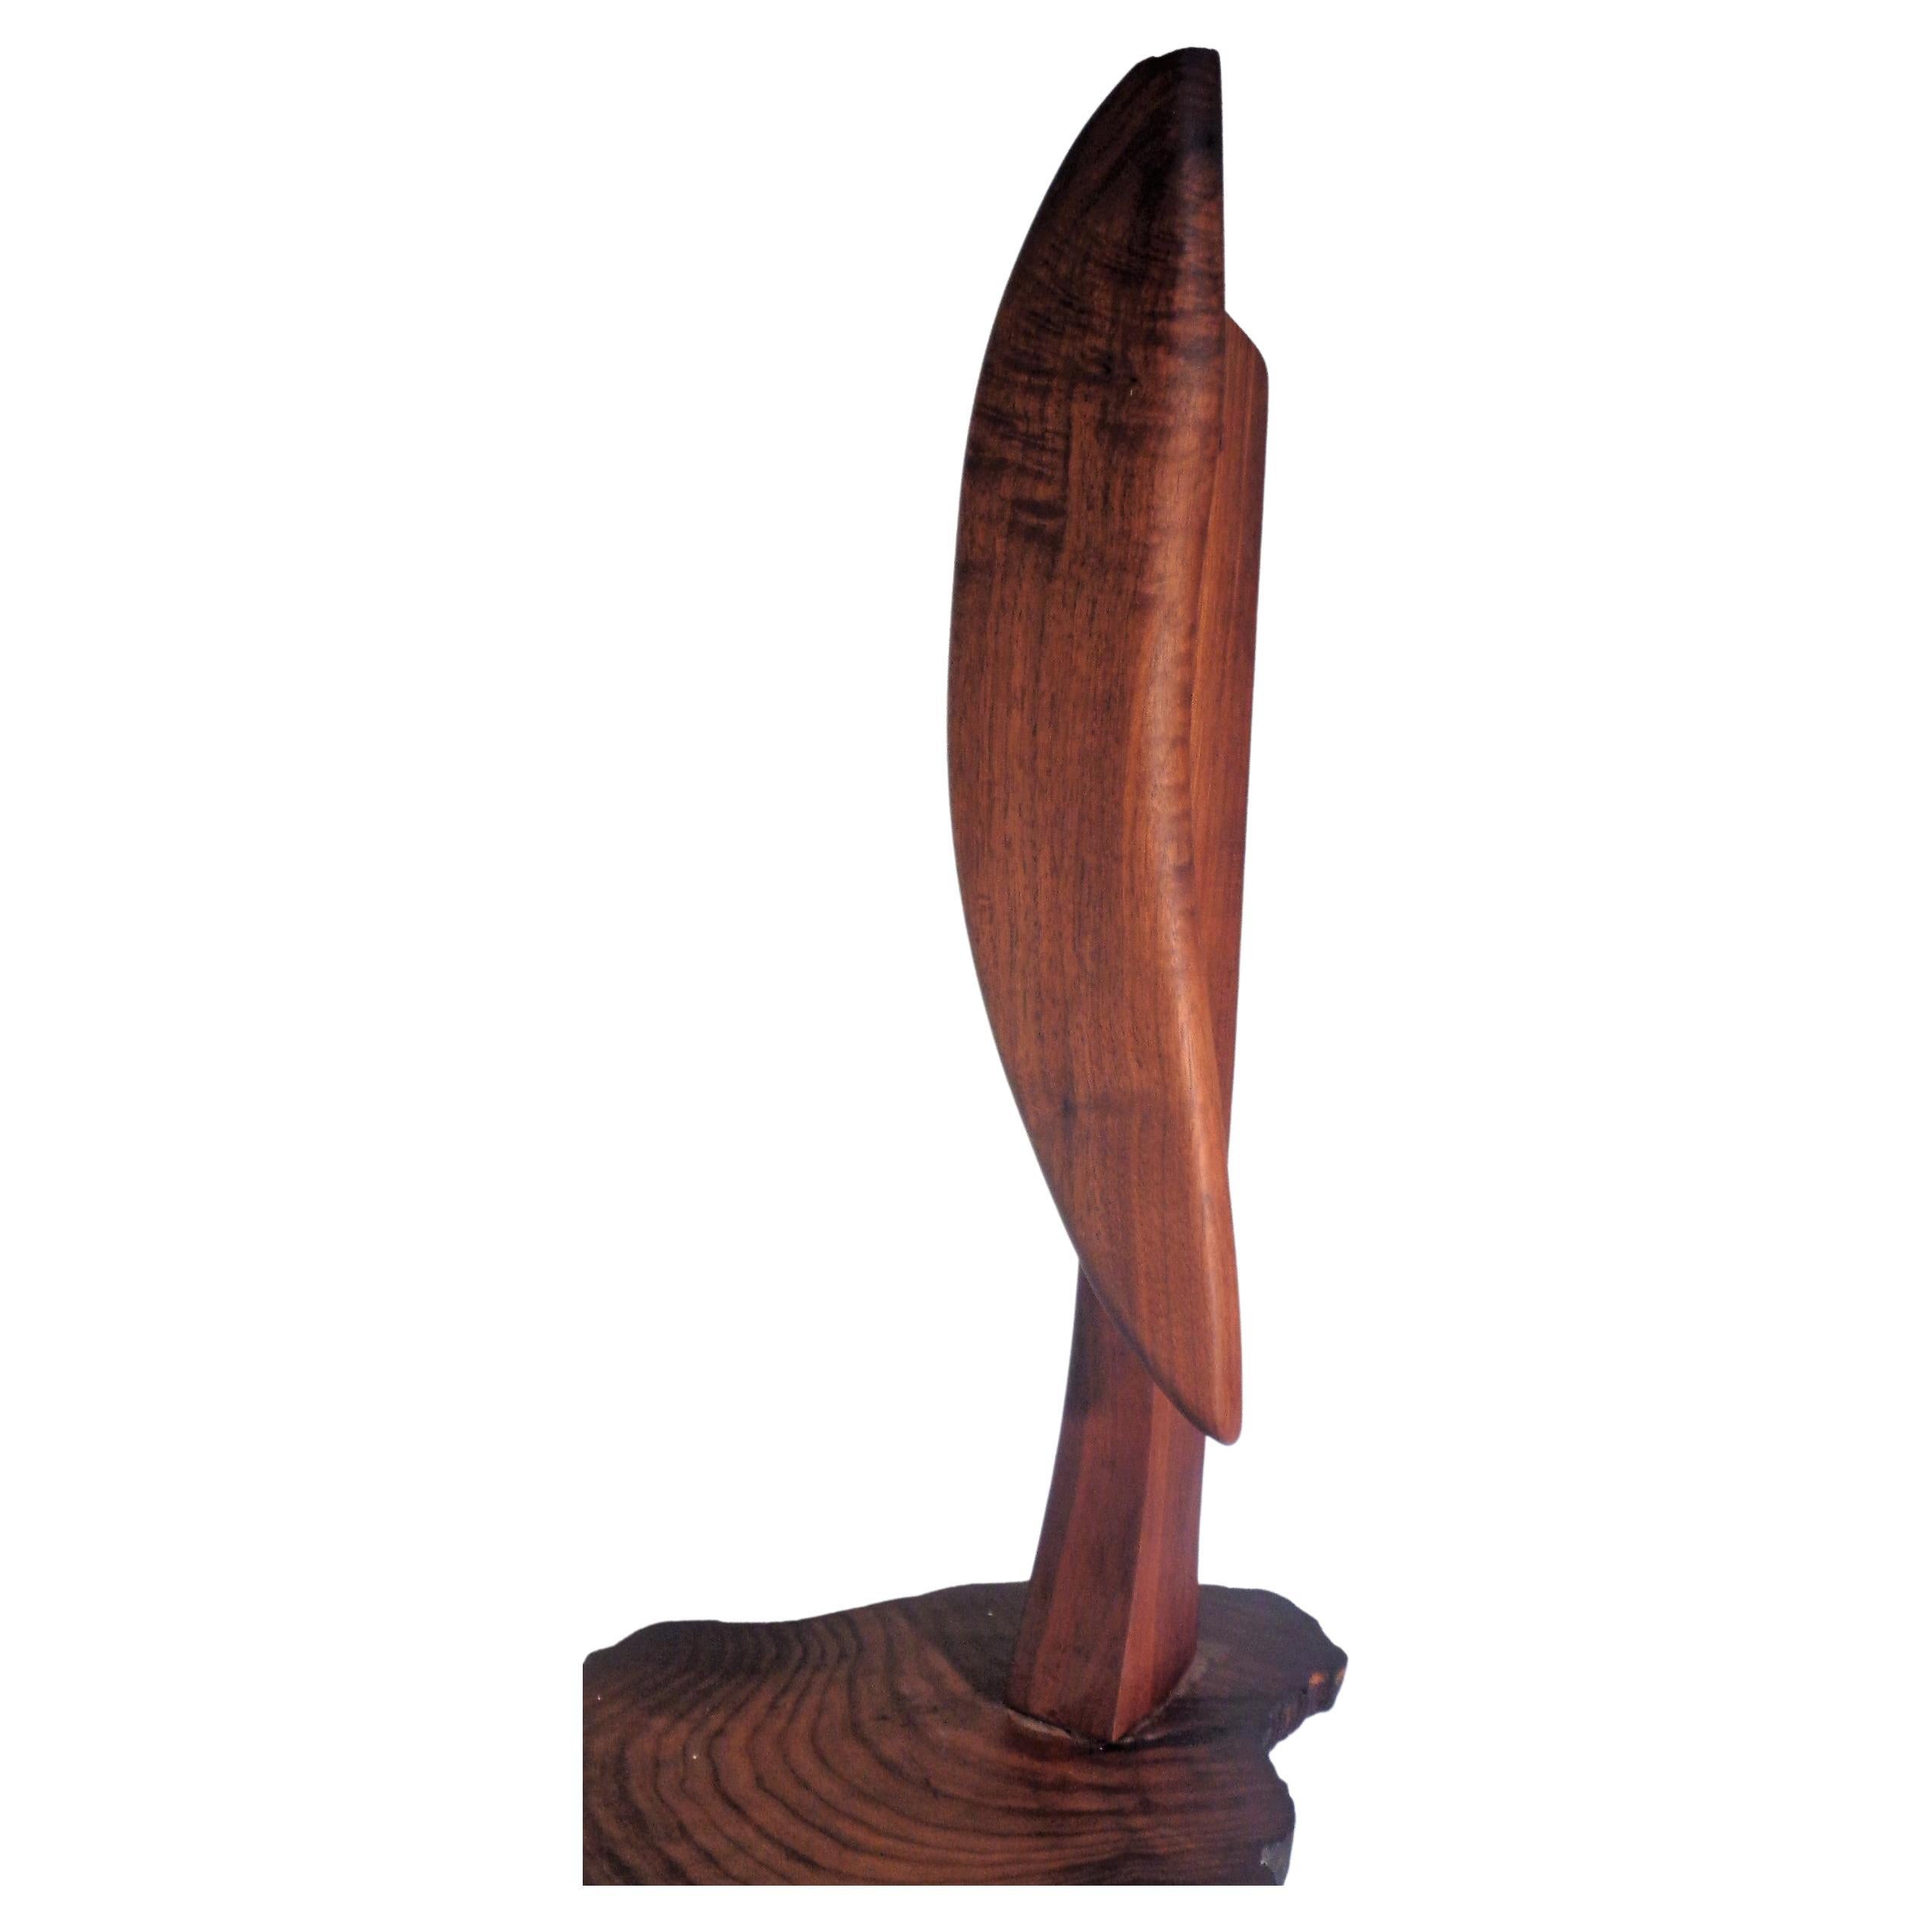 American Studio Craft Movement Modernist Abstract Wood Sculpture, 1970-1980 For Sale 1